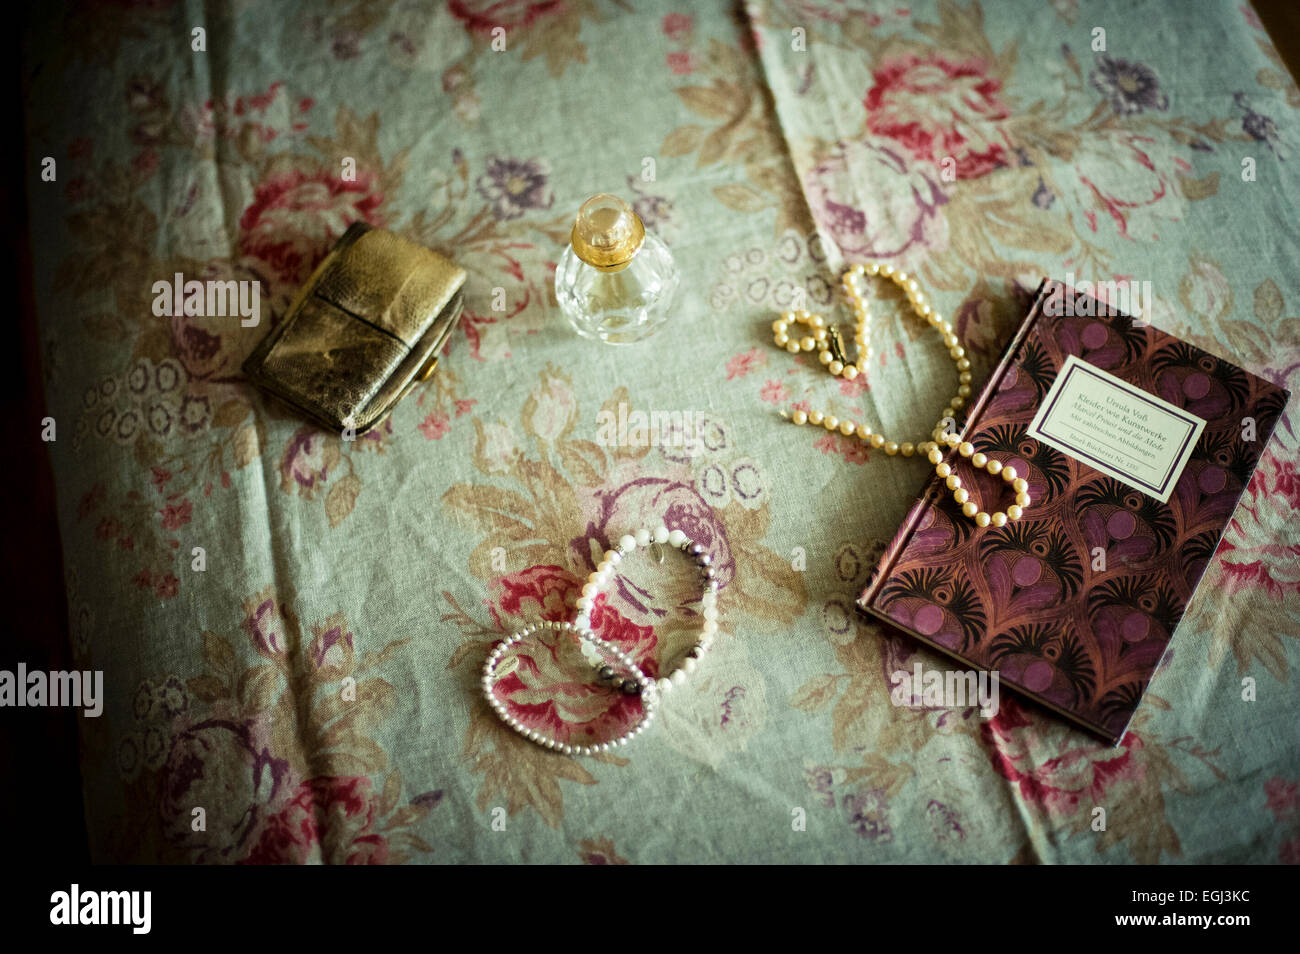 Still life with Flacon, pearl necklace and book, Stock Photo